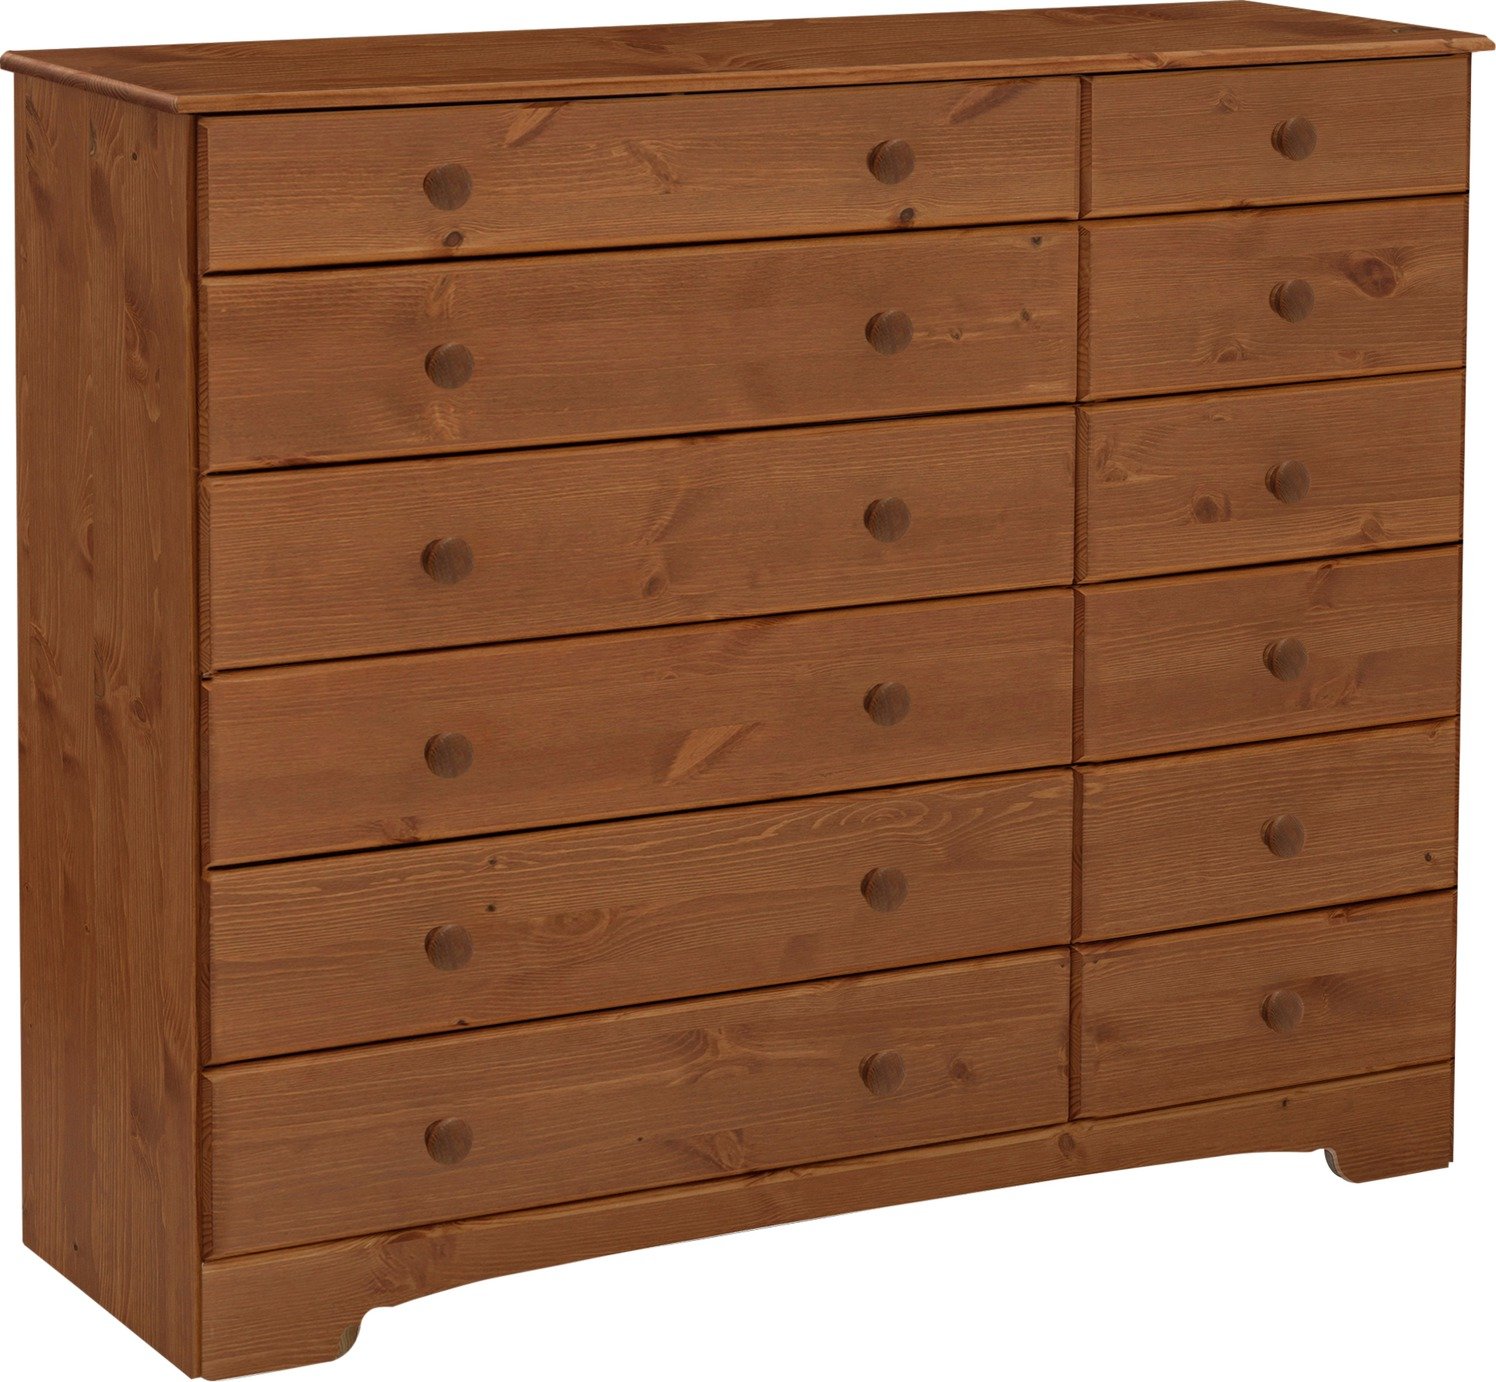 Argos Home Nordic 6 6 Drawer Chest of Drawers - Pine